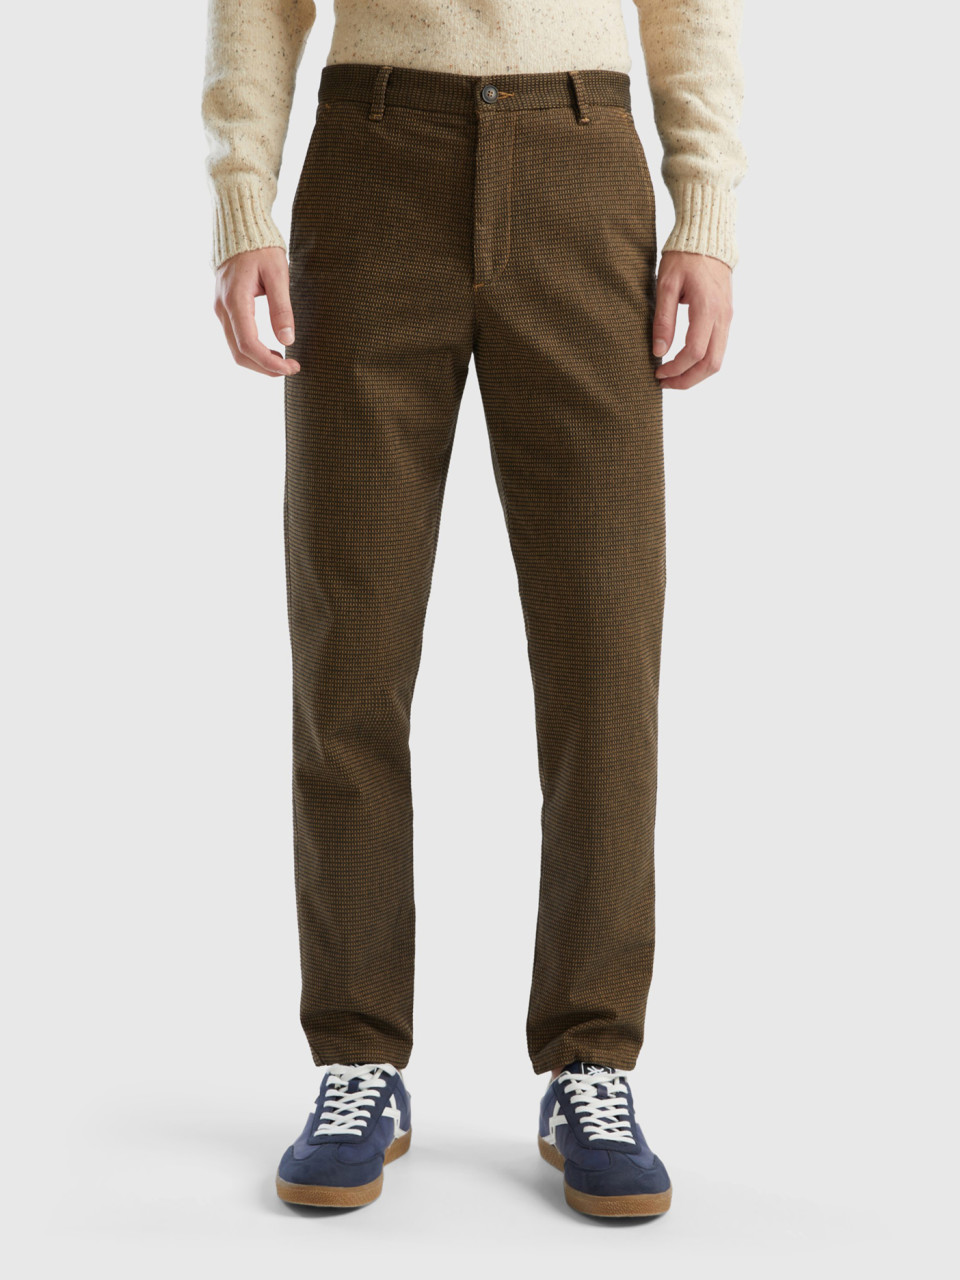 Benetton, Slim Fit Chinos With Dropped Crotch, Brown, Men